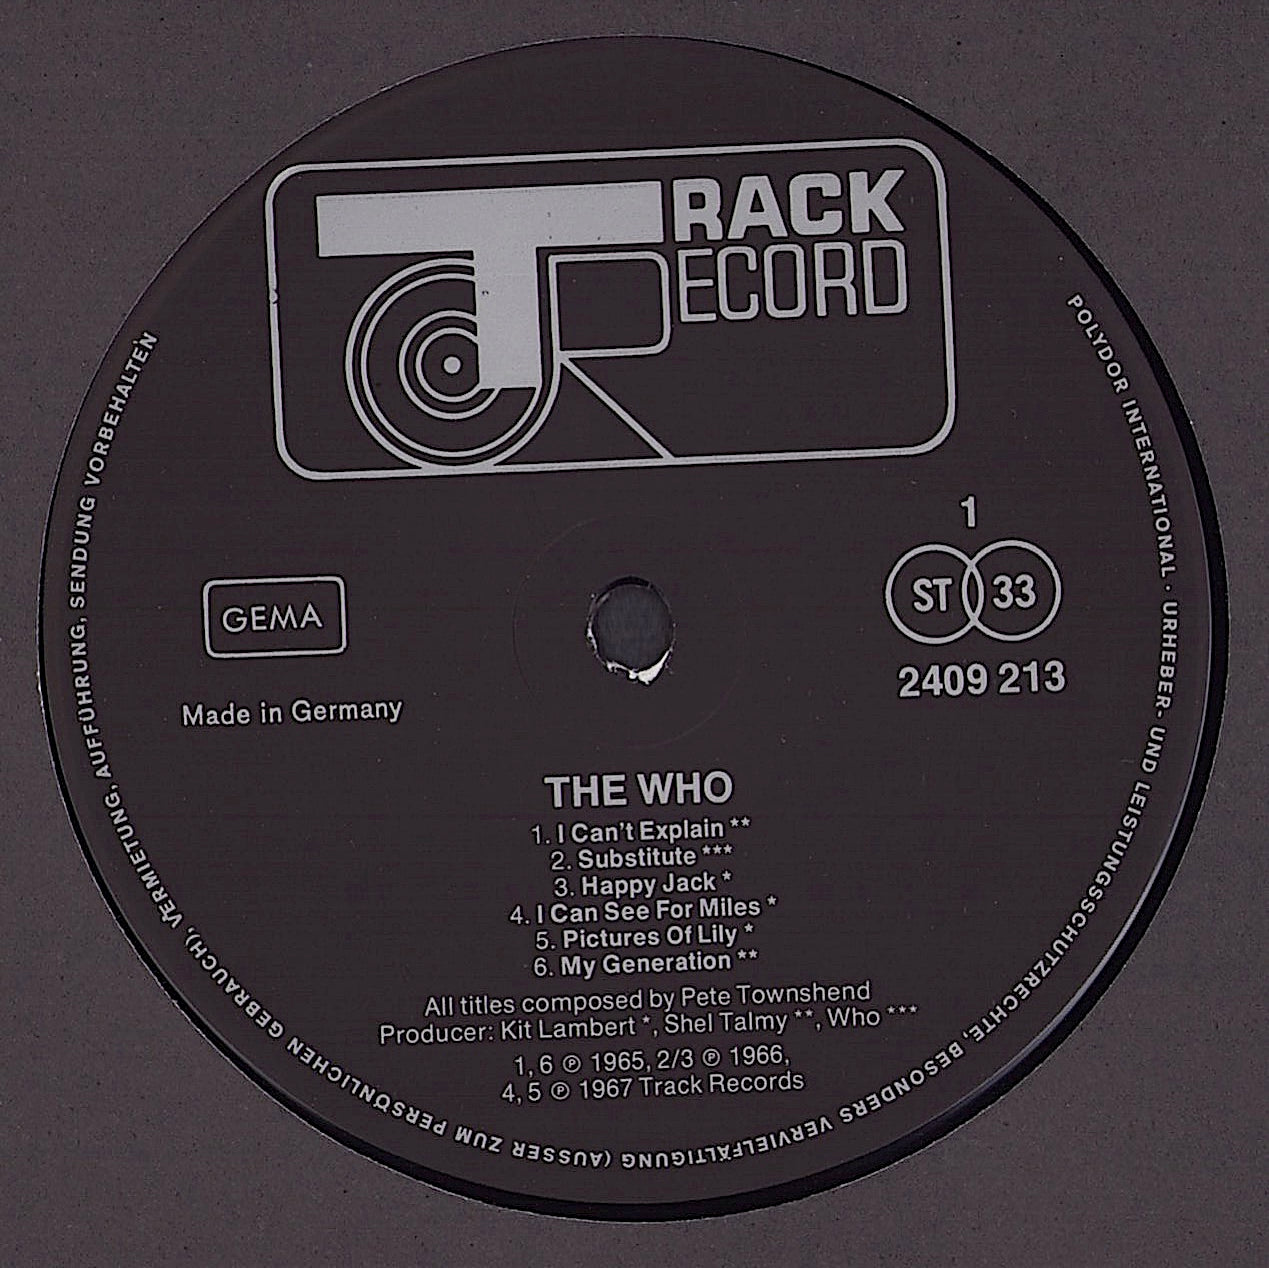 The Who ‎- The Who Vinyl LP